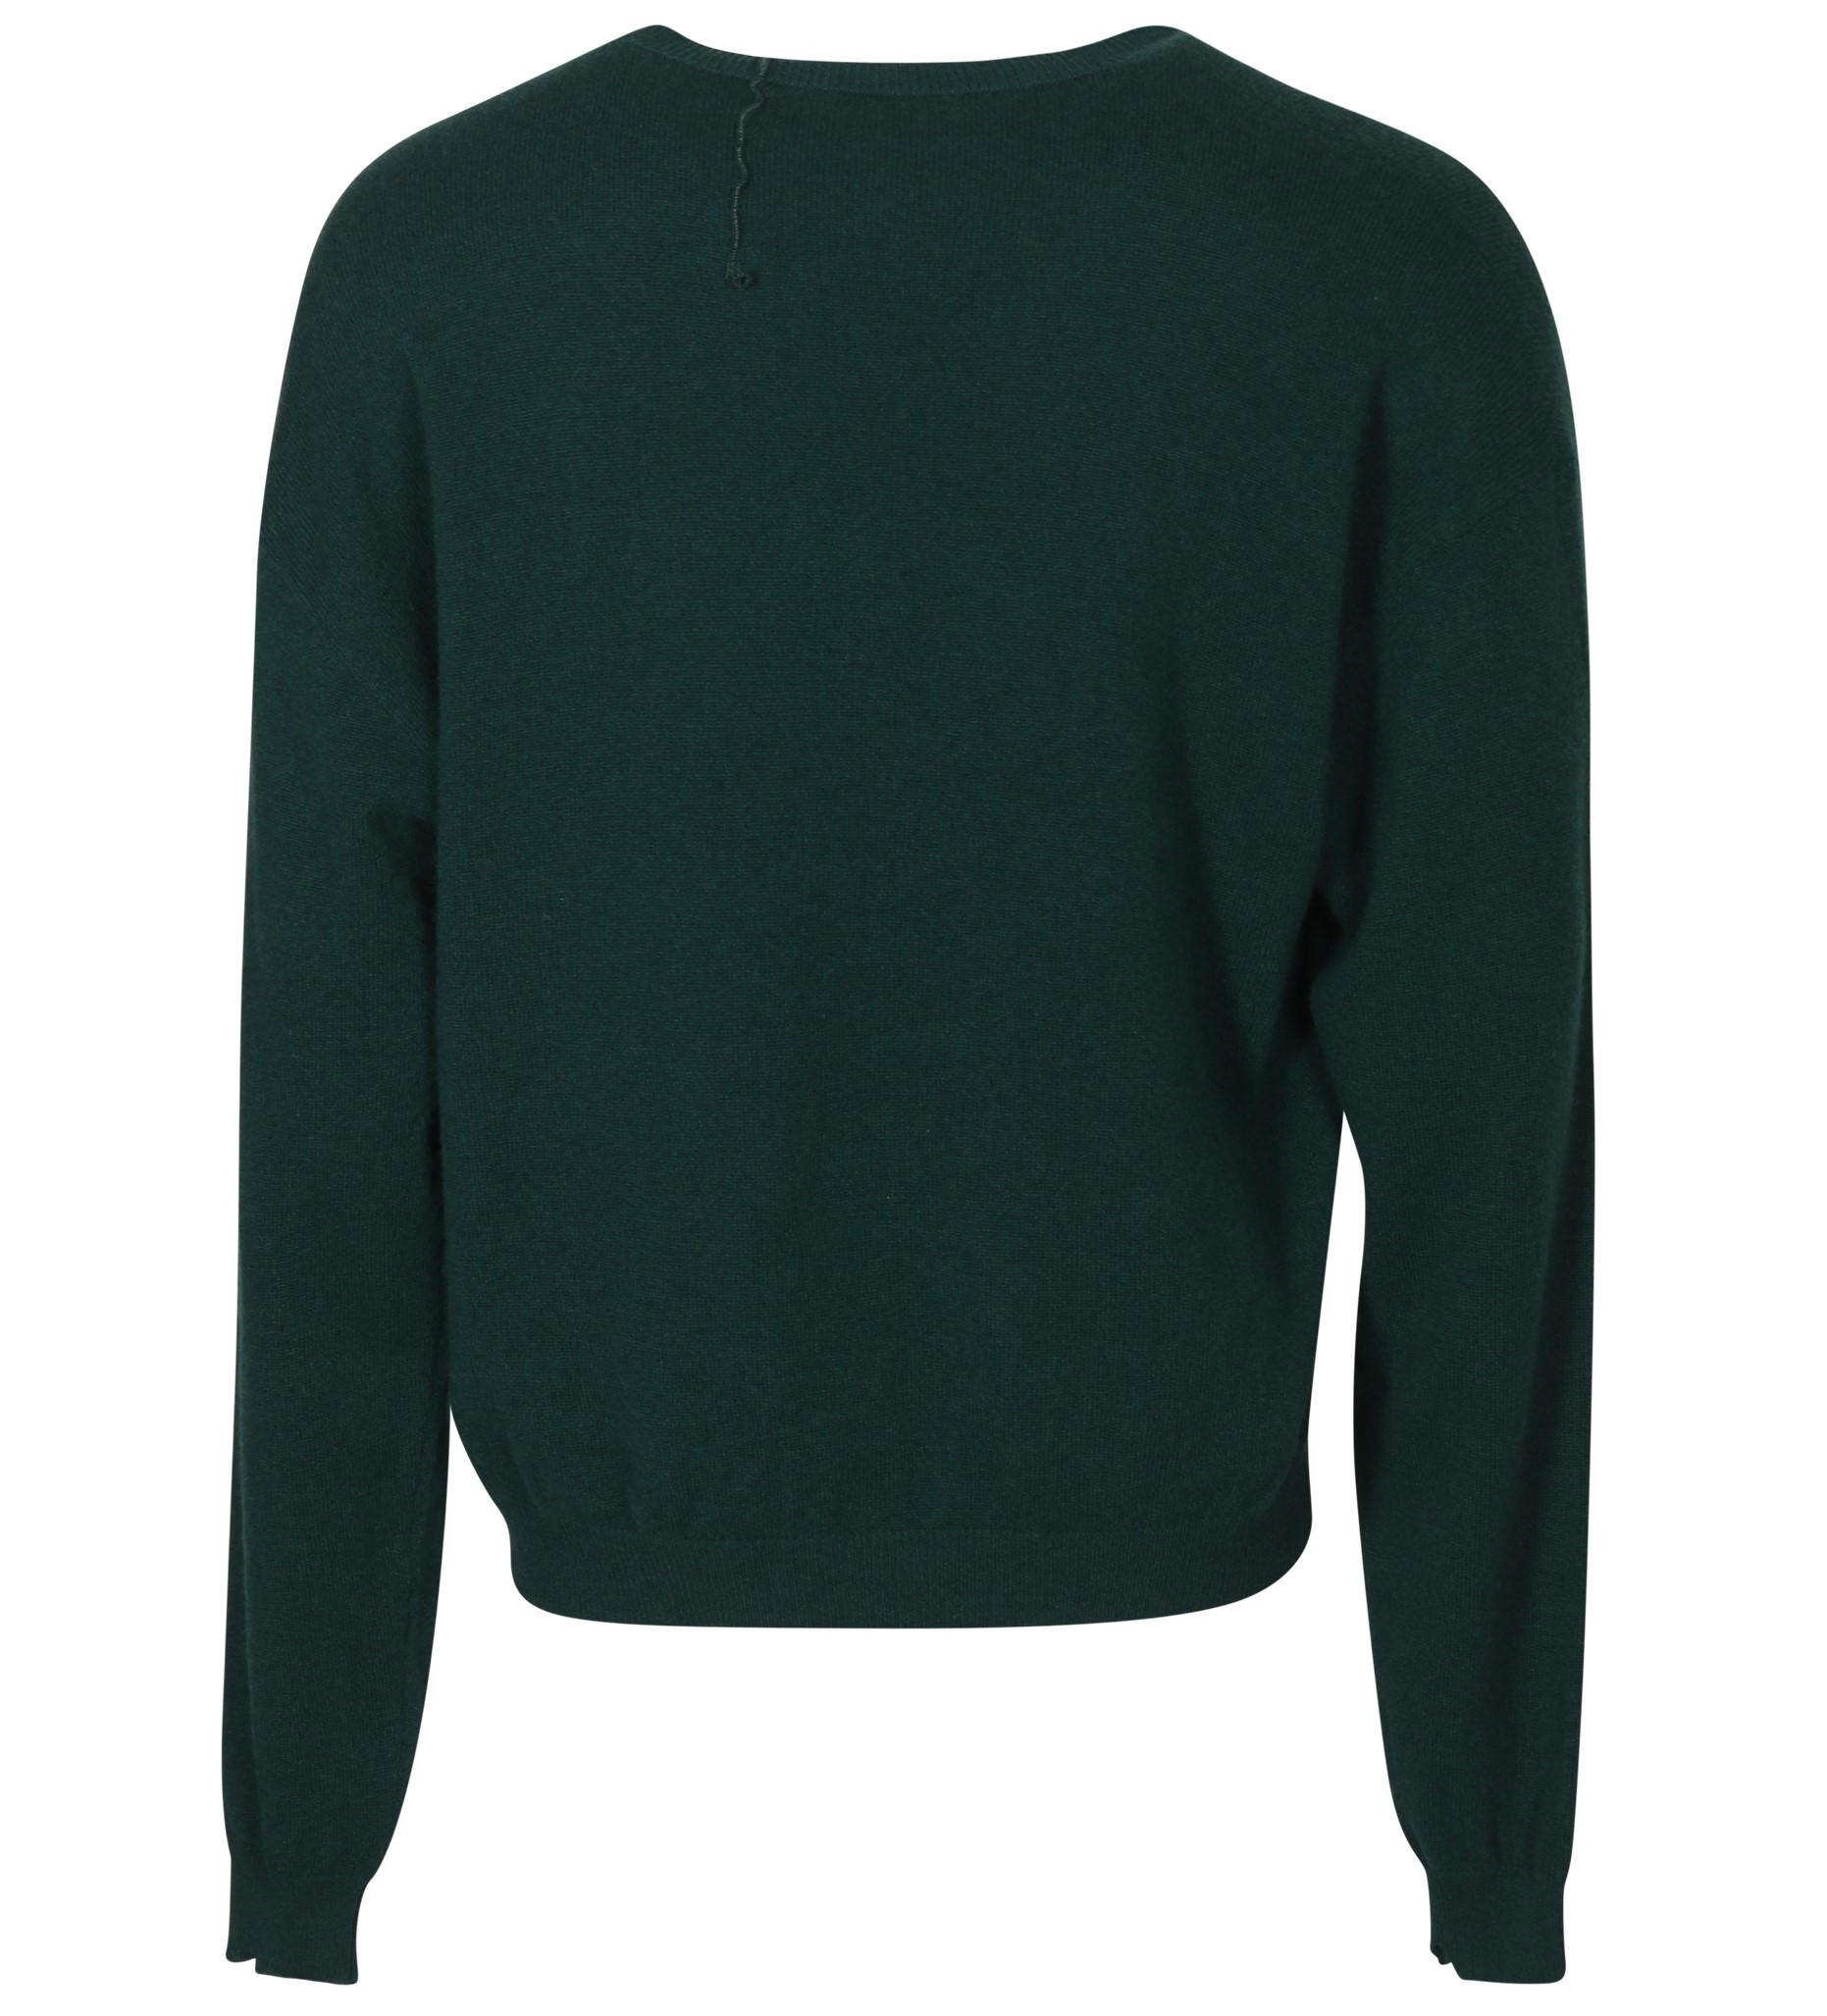 RAMAEL Infinity Cashmere Sweater in Green S